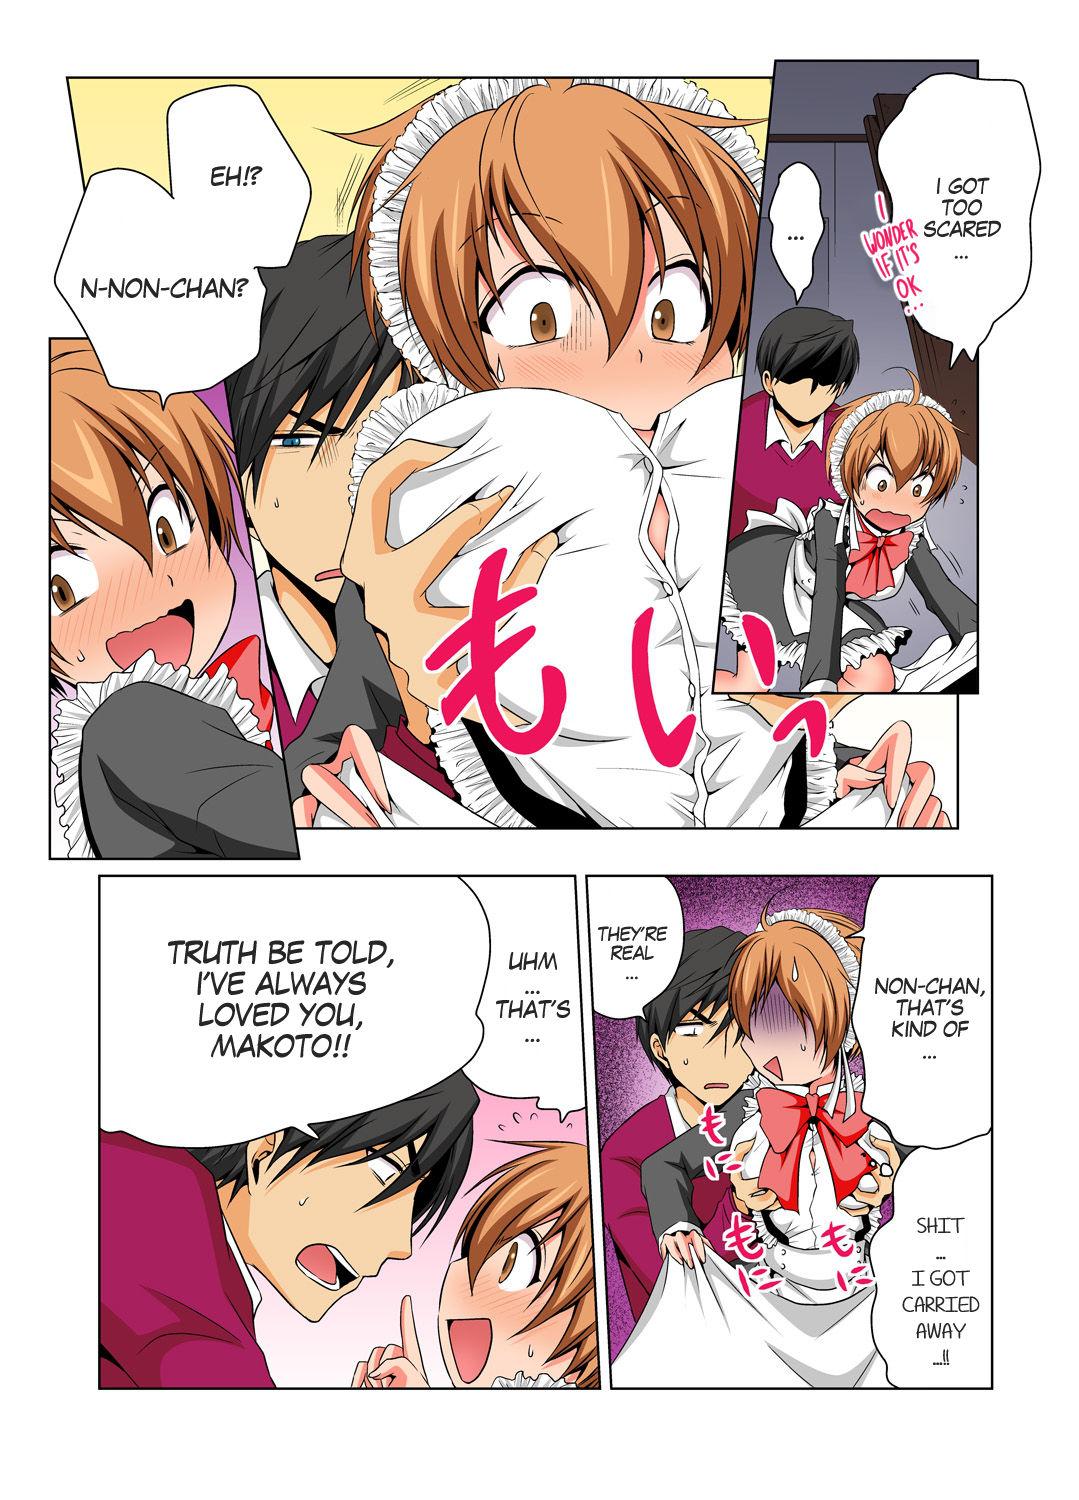 Fishnets Nyotaika de Ecchi Kenshin!? Mirudake tte Itta no ni... 6 | Gender Bender Into Sexy Medical Examination! You said that you were only going to look... 6 Babes - Page 6